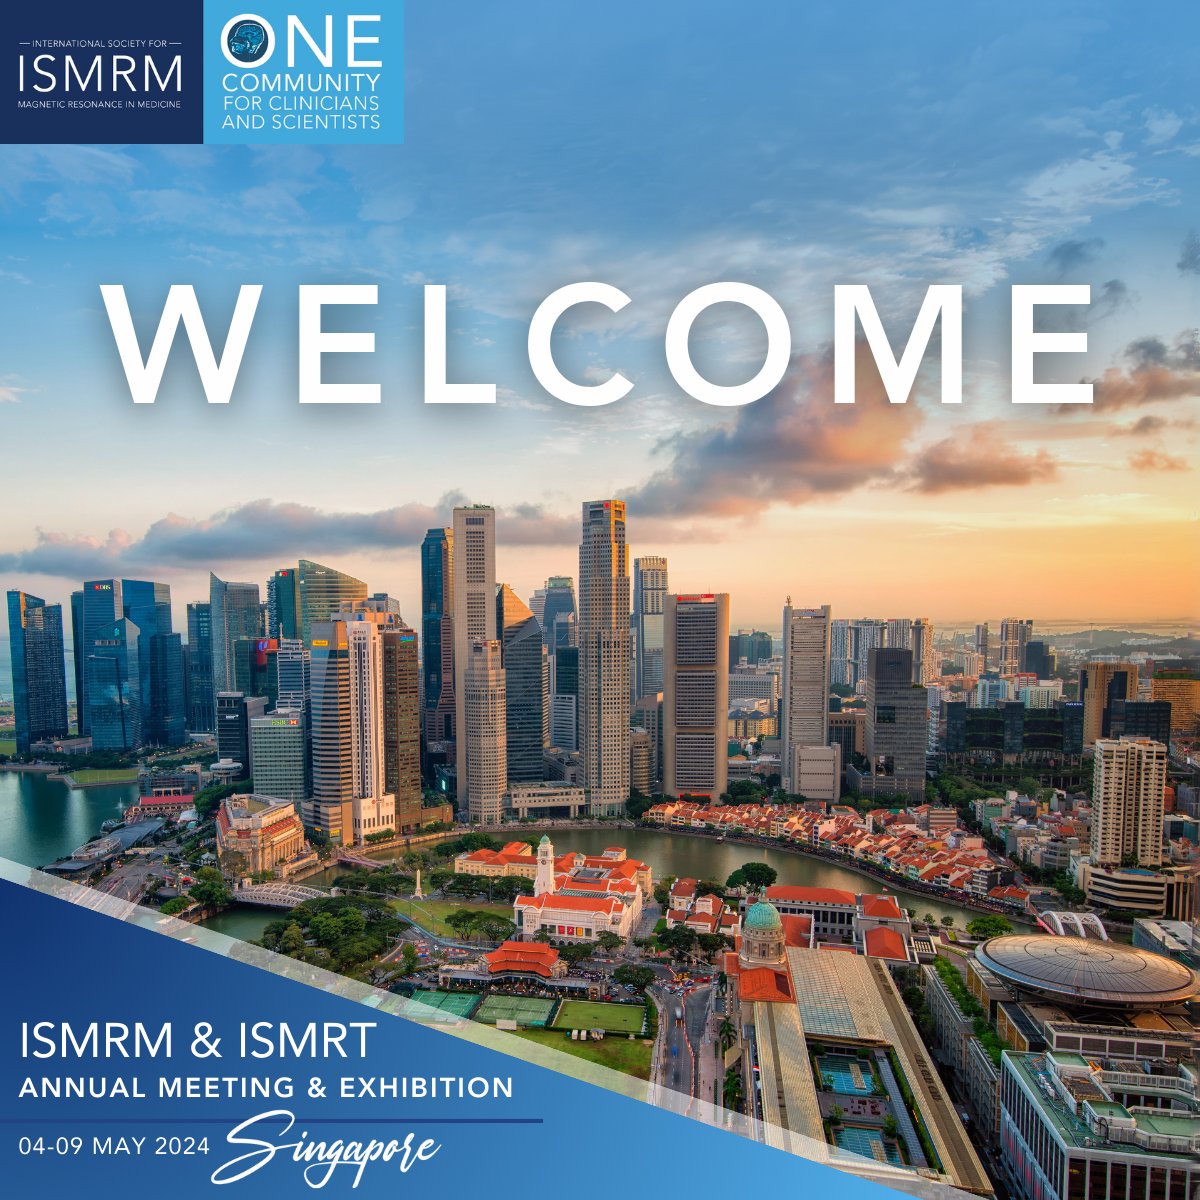 Welcome, ISMRM! Check your inbox for daily newsletters including program highlights and special sessions. #ISMRM2024 #ISMRT2024 #ISMRM #ISMRT #MRI #MR #MagneticResonance #Singapore #MedicalImaging